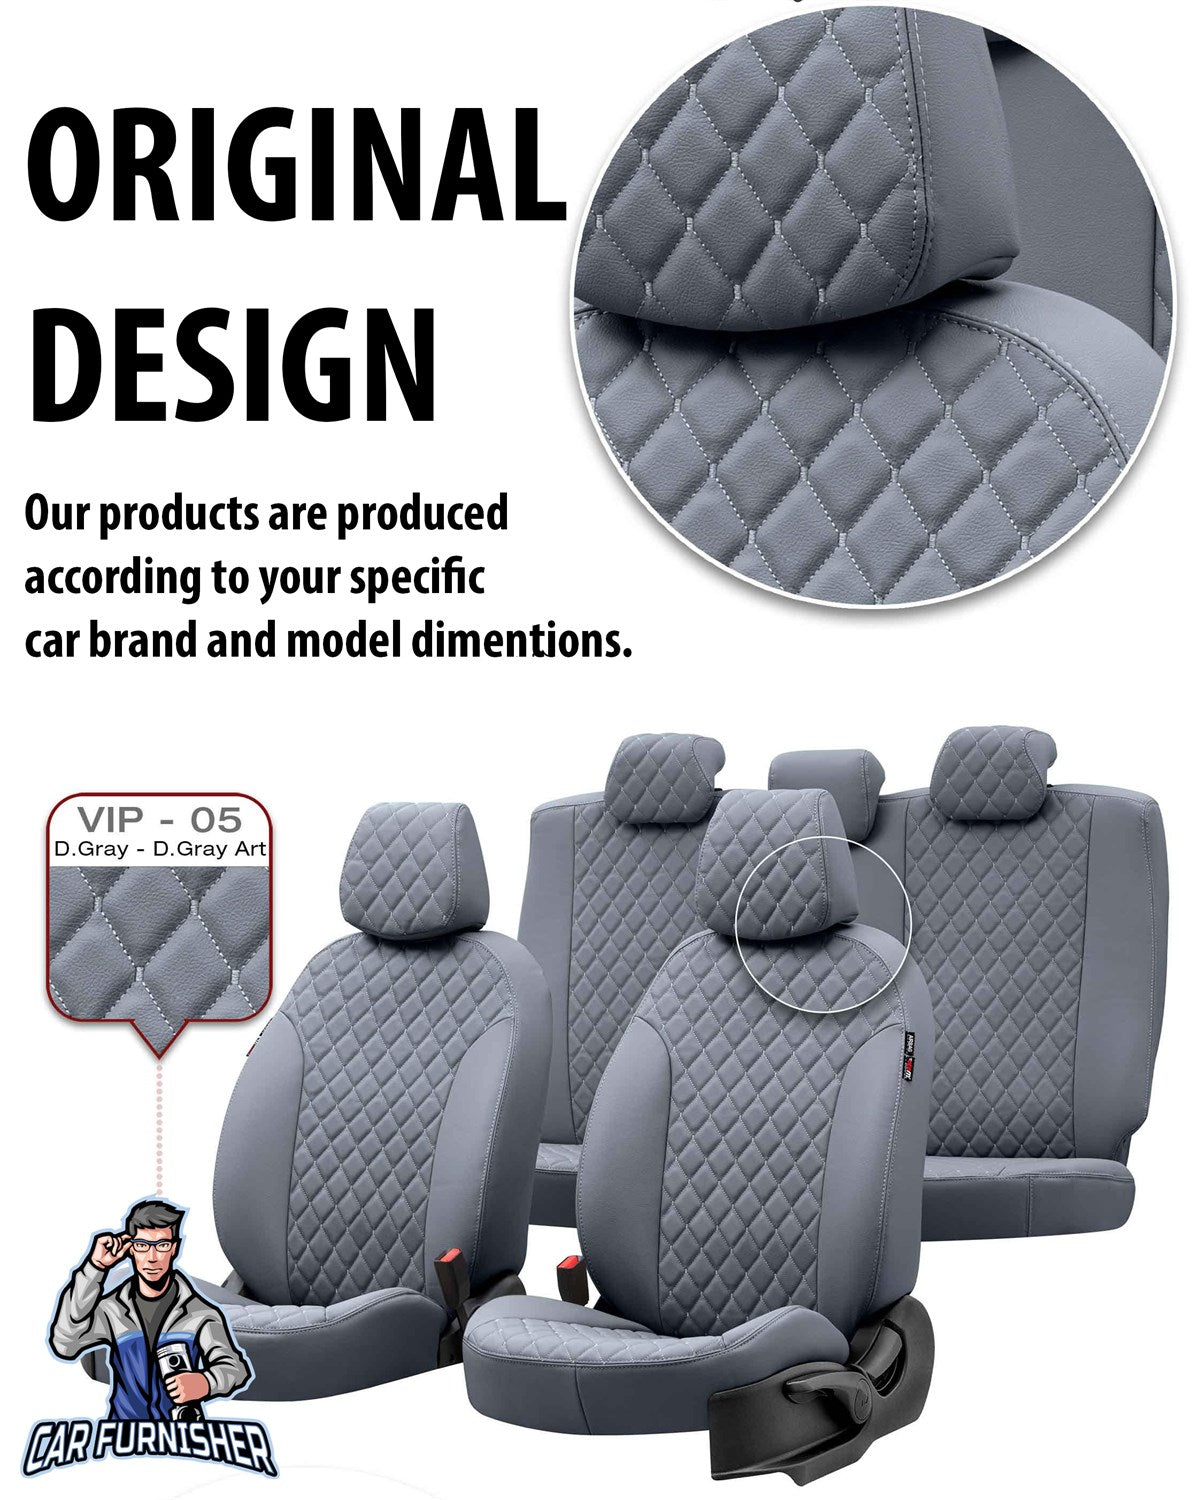 Porsche Cayenne Seat Covers Madrid Leather Design Blue Leather